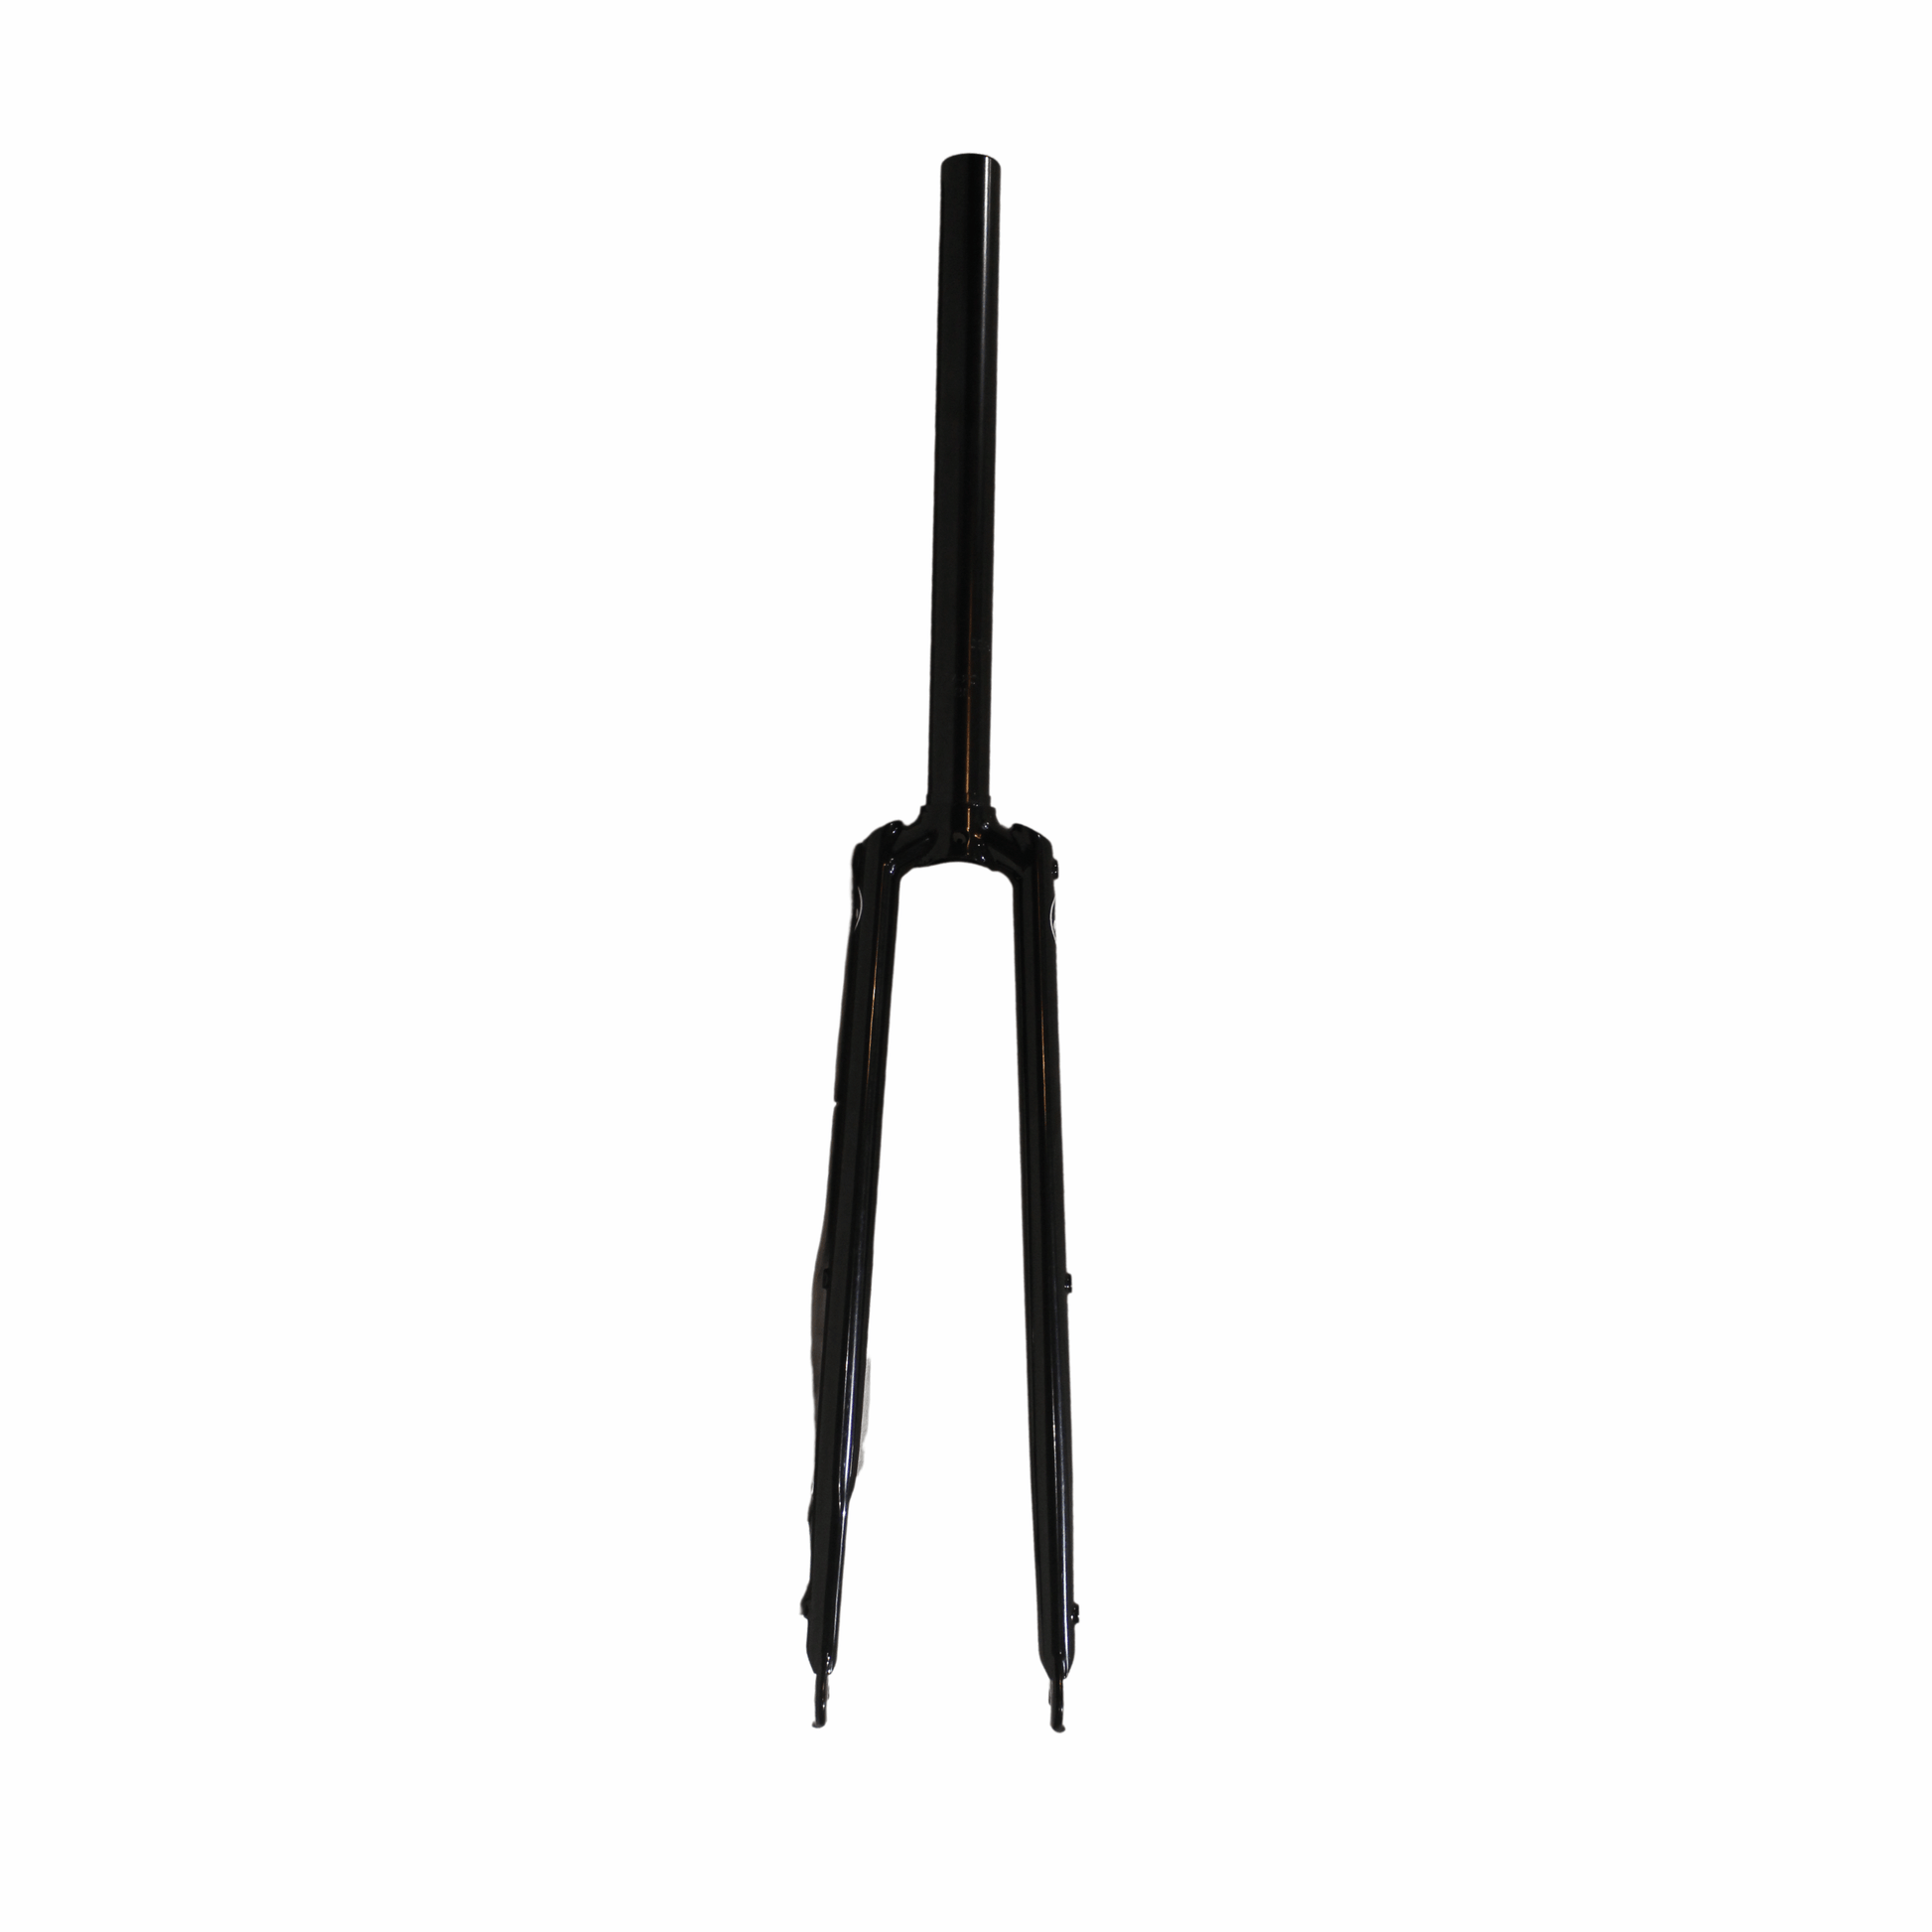 The Project CX Fork